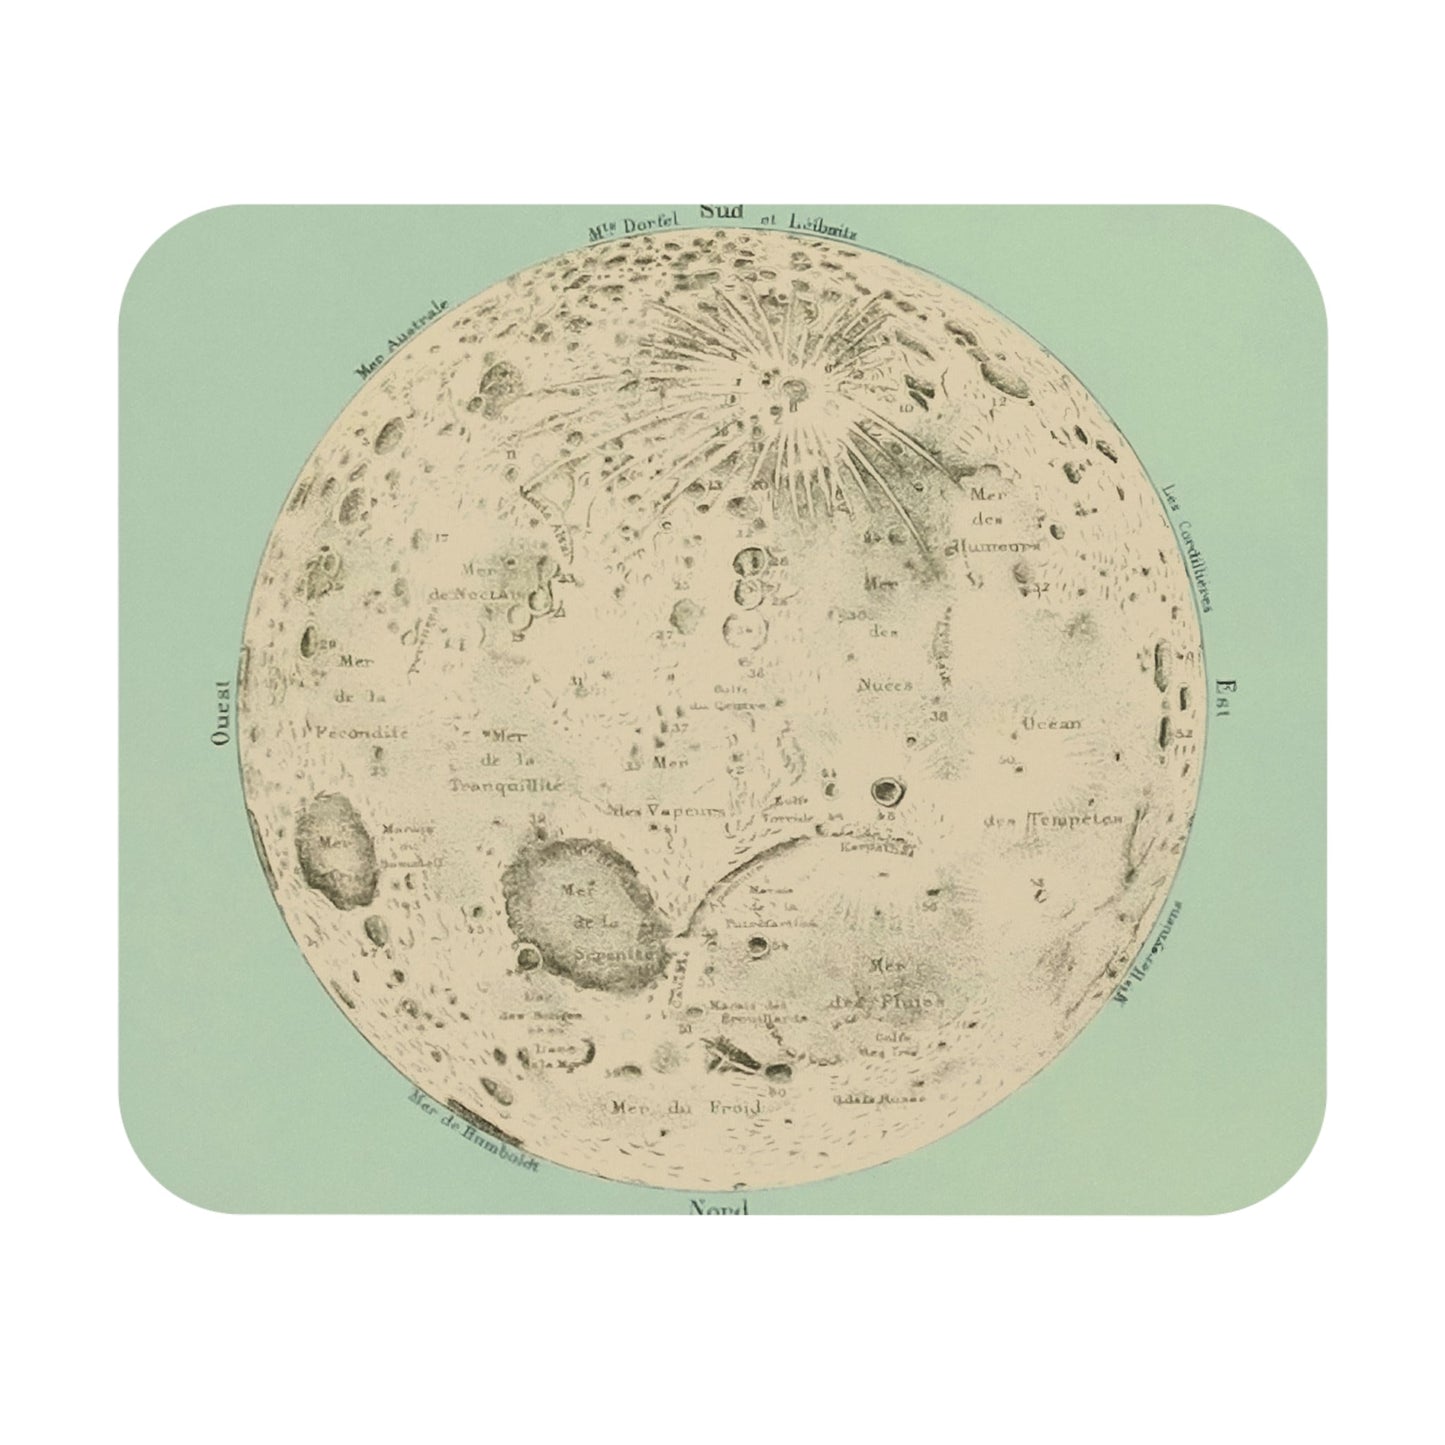 Teal Moon Mouse Pad with vintage drawing, desk and office decor showcasing teal moon illustrations.